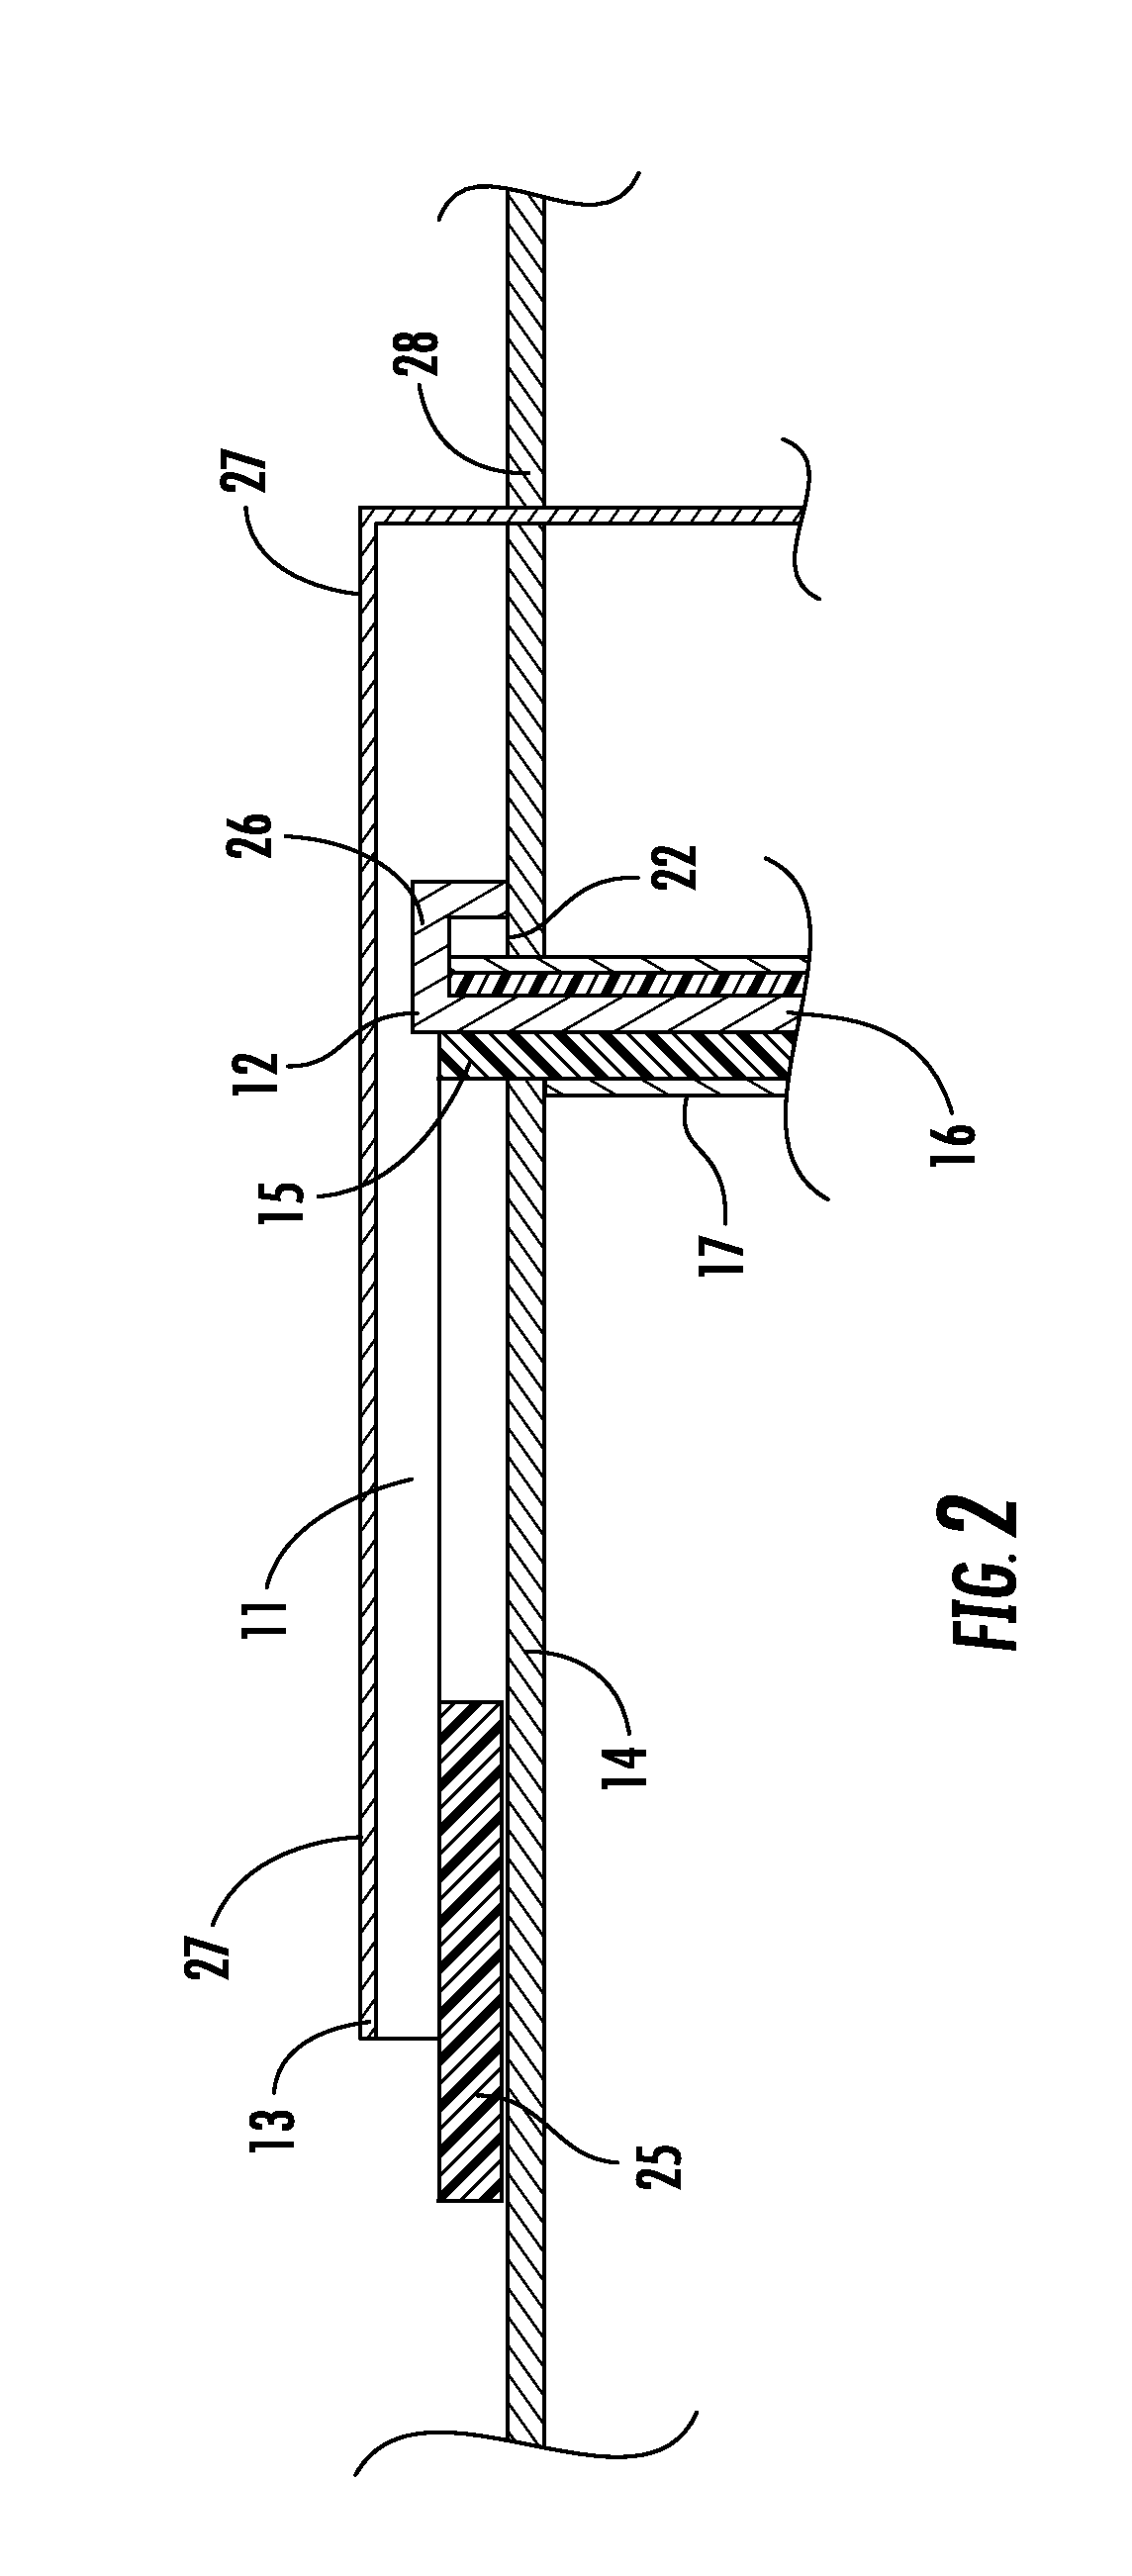 Electronic device having solar cell antenna element and related methods